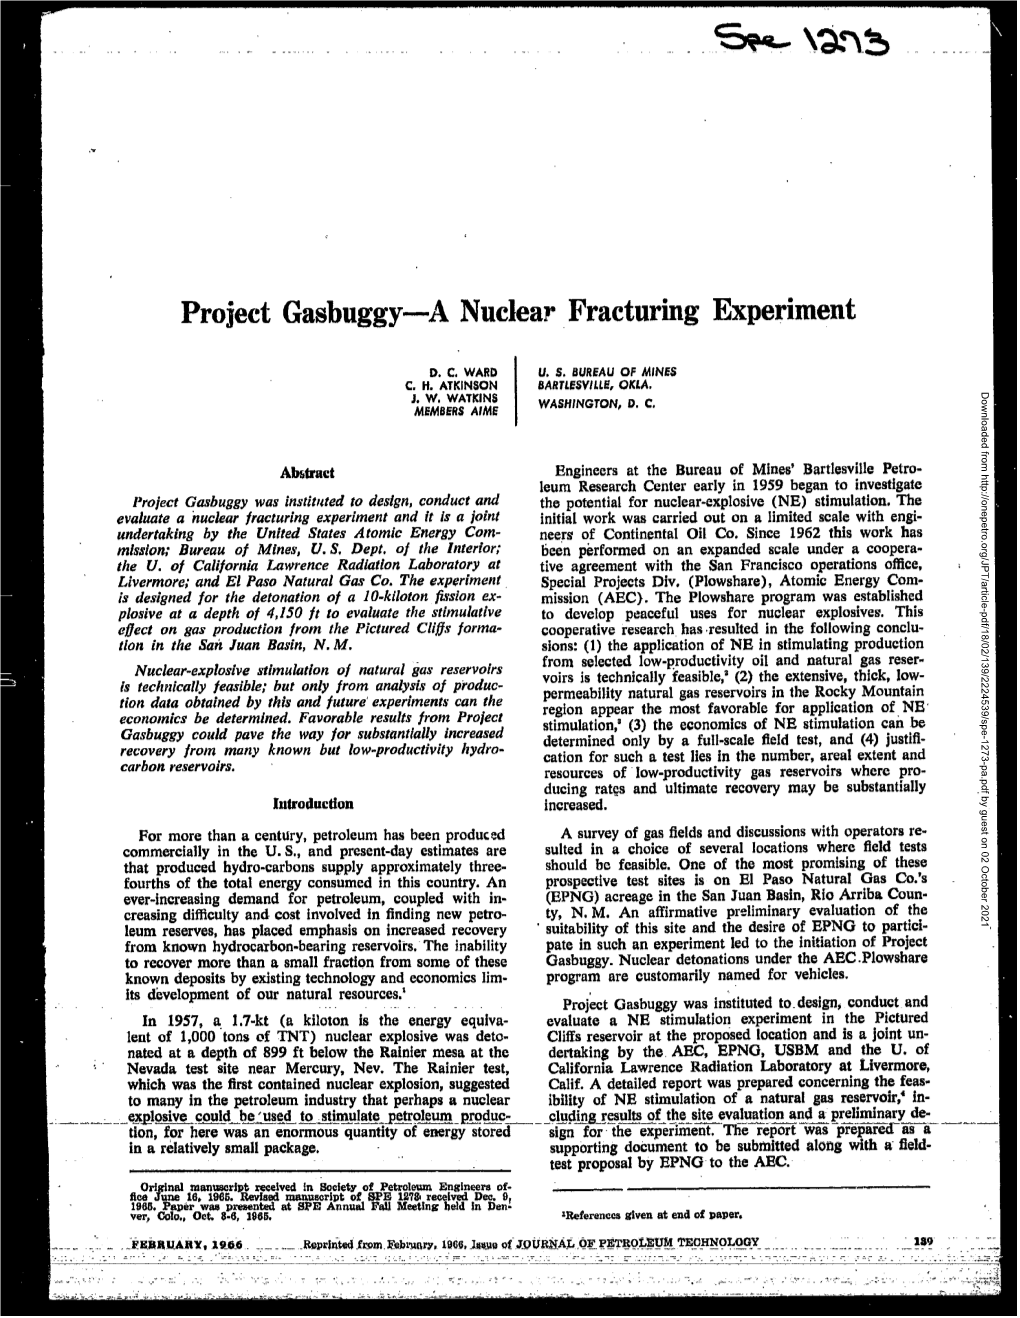 Project Gasbuggy a Nuclear Fracturing Experiment